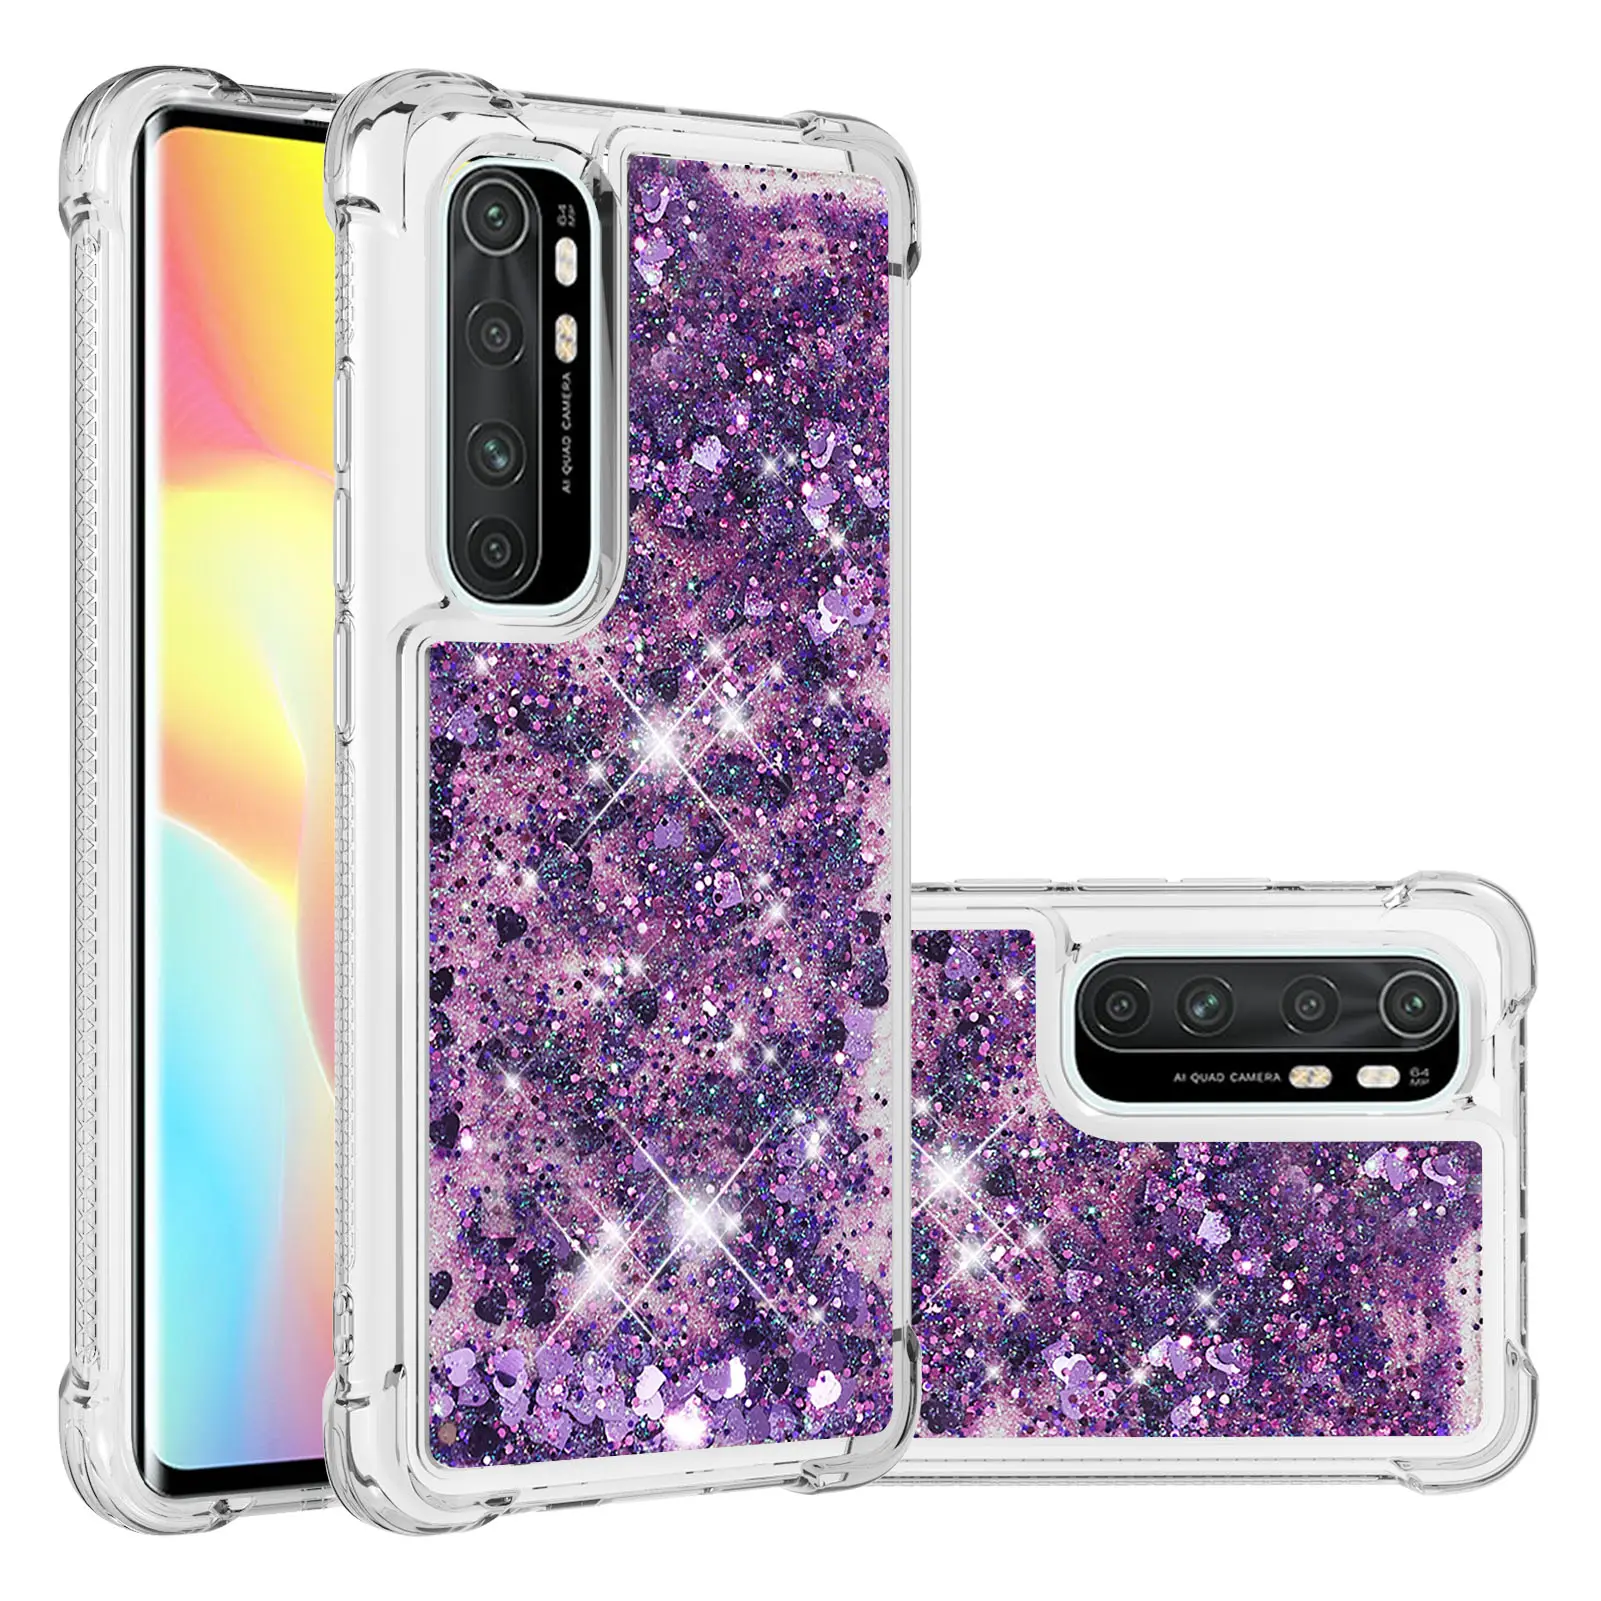 bling glitter star clear phone Case For Xiaomi 11T Pro 10T lite Poco X3 NFC M3 Note 10 lite A2 Lite Silicon Transparent cover